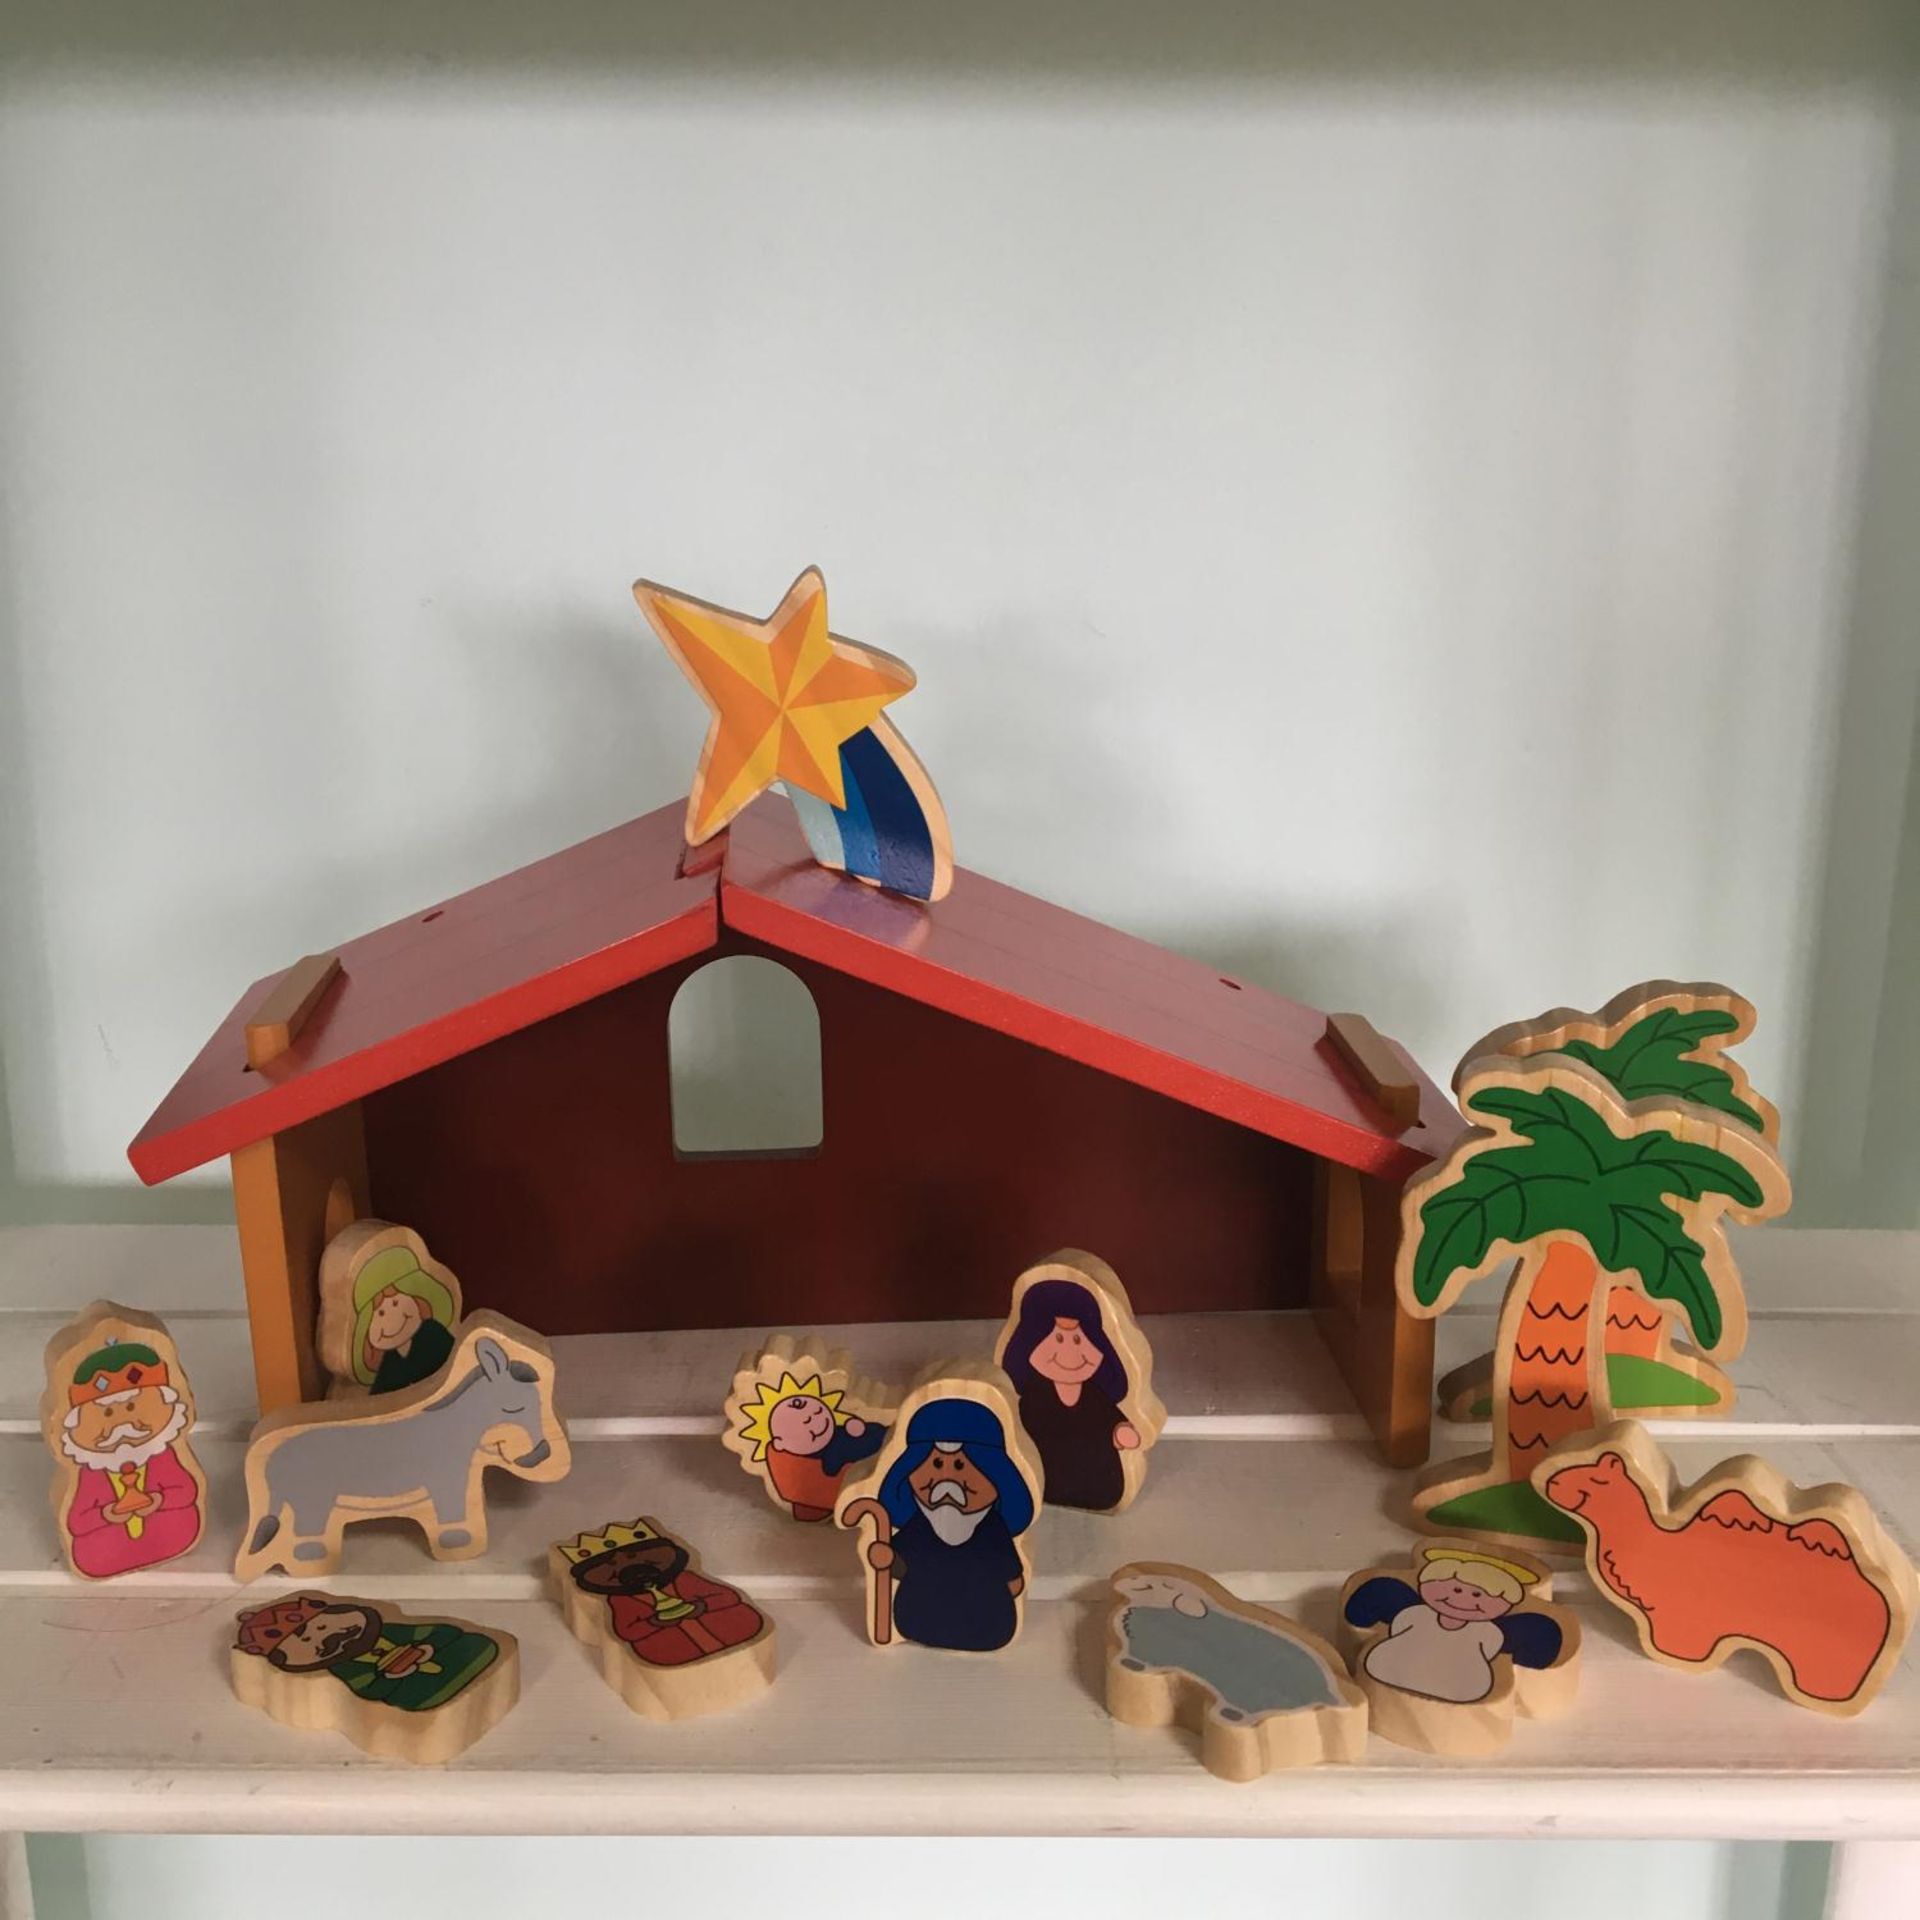 A child's toy nativity scene made up of multiple wooden pieces. Includes free UK delivery.